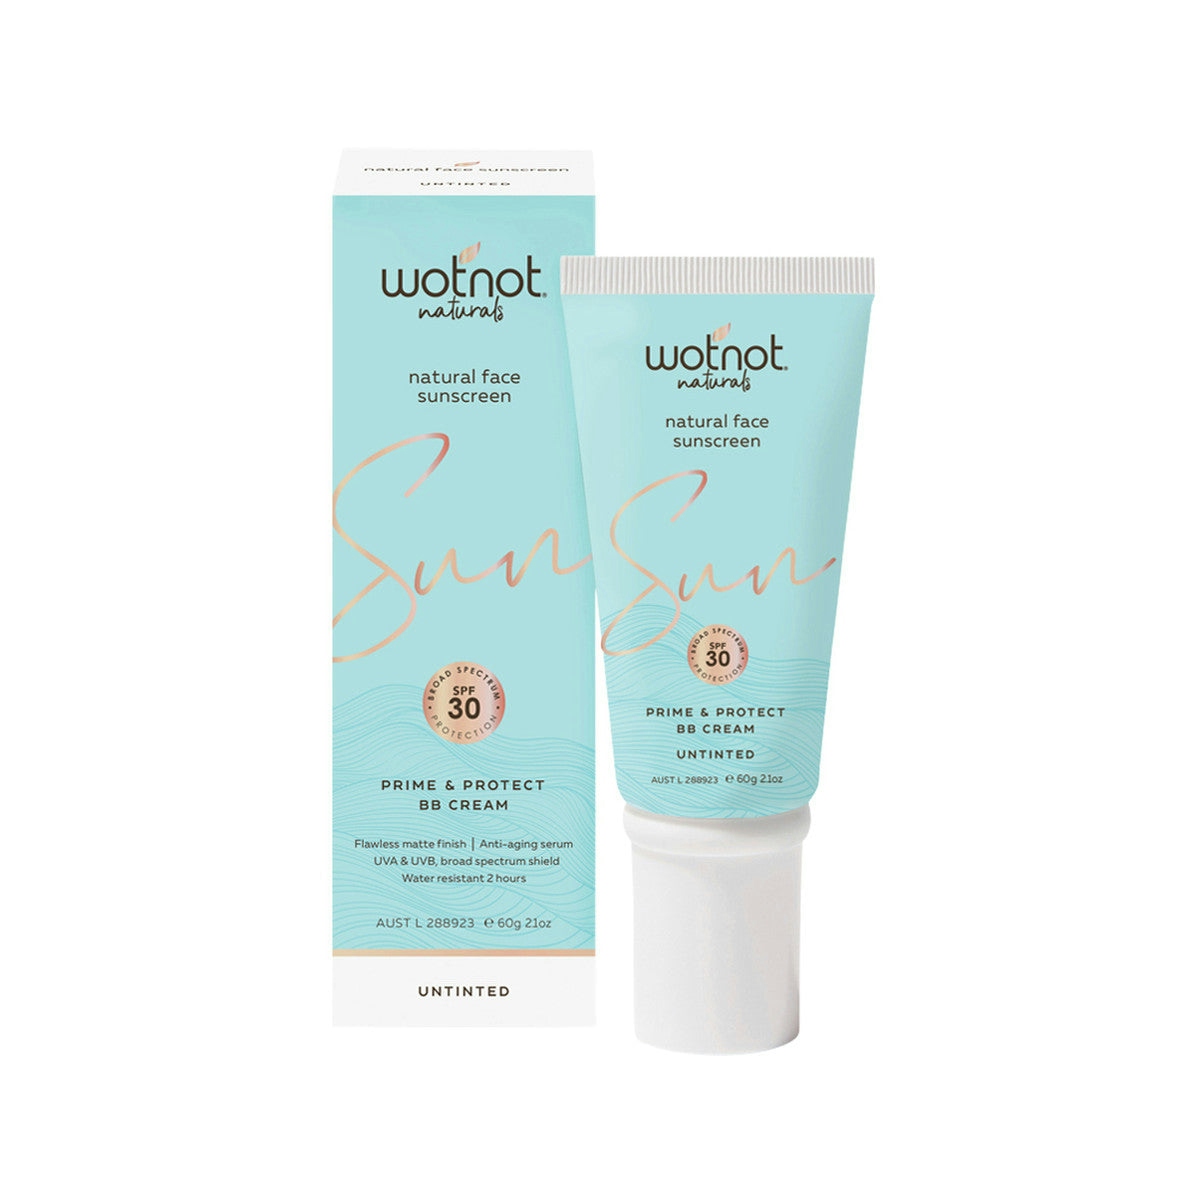 image of Wotnot Natural Face Sunscreen SPF 30 (Prime & Protect) Untinted BB Cream 60g o white background